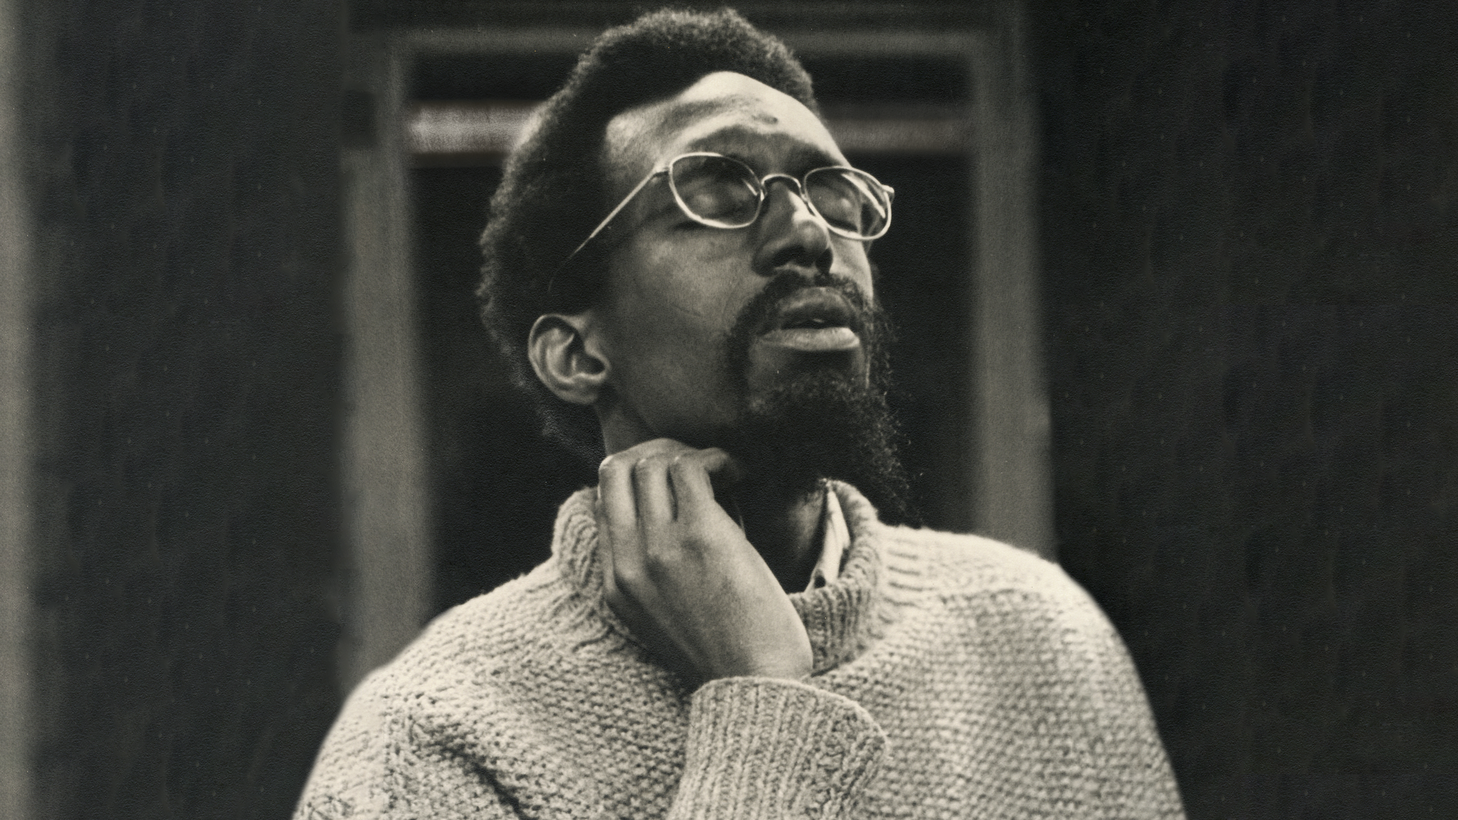 Avant garde composer Julius Eastman was known for composing pioneering minimalist works with provocative titles.